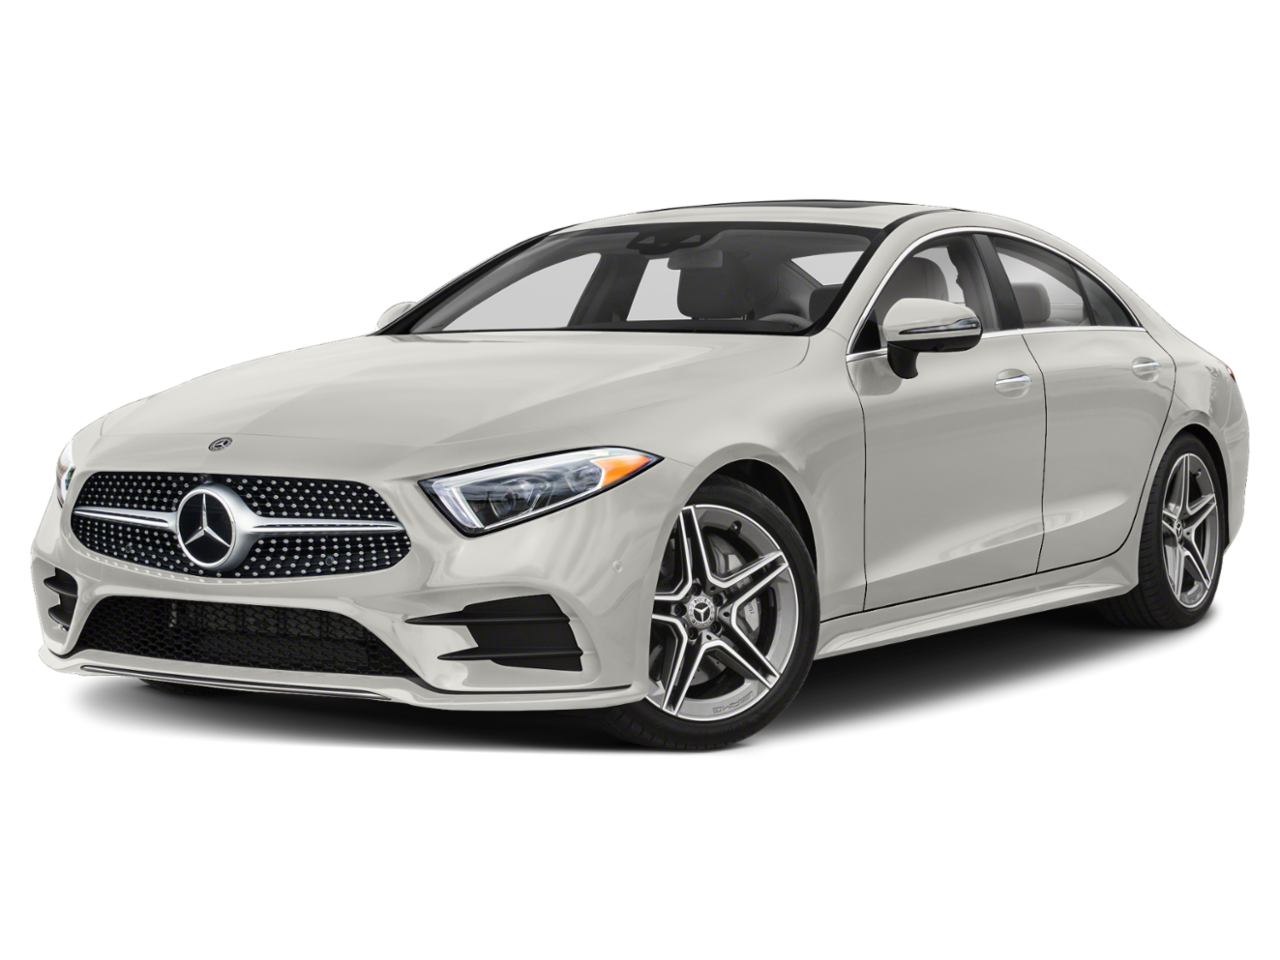 Find Your Next Mercedes Benz At Sewell